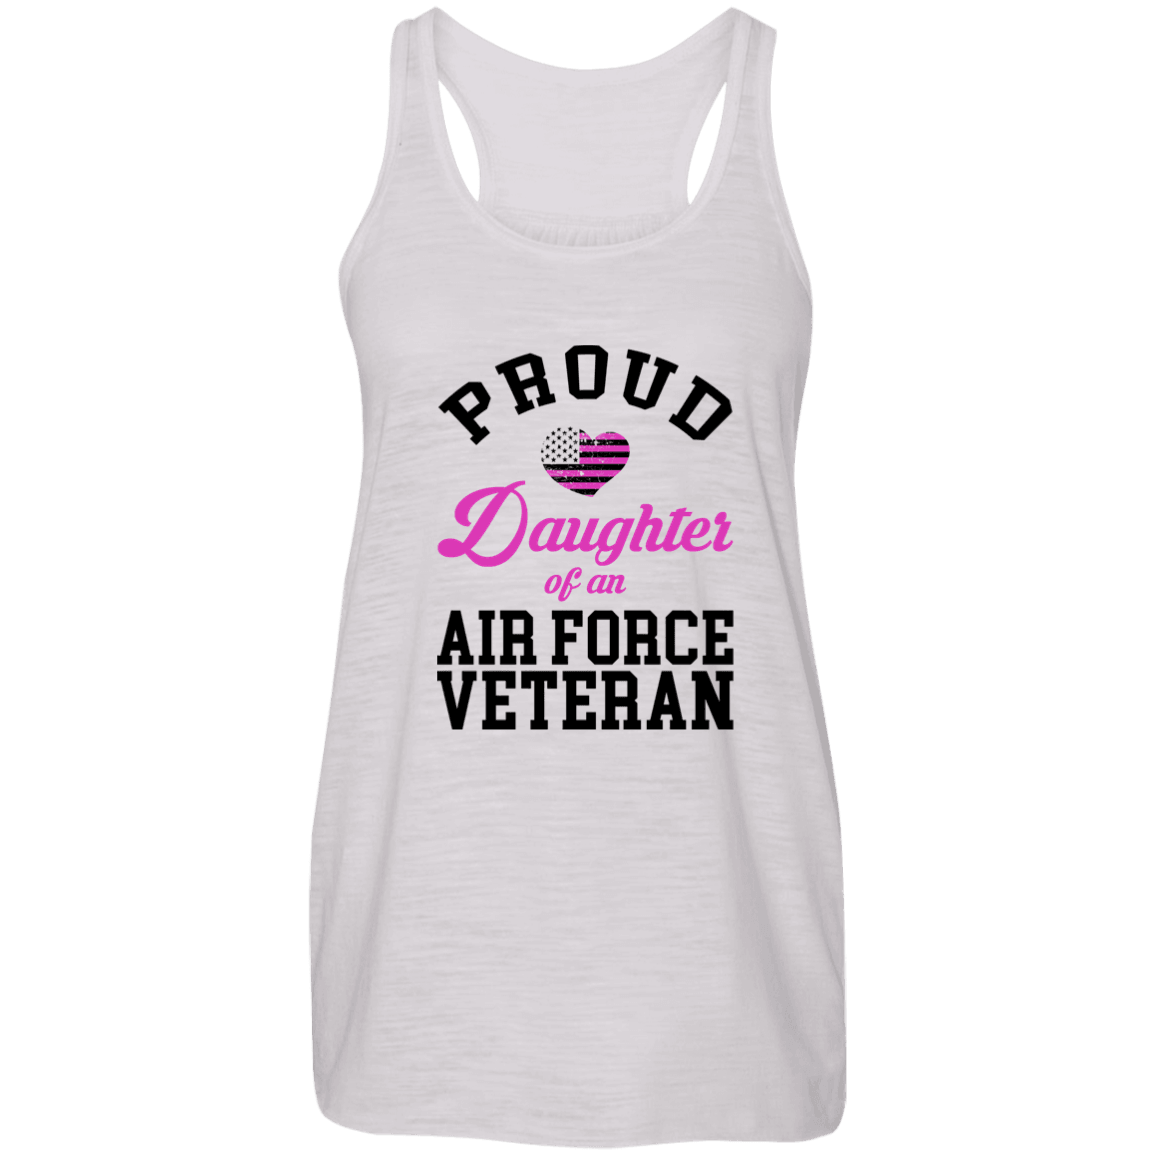 Designs by MyUtopia Shout Out:Proud Daughter of an Air Force Veteran Ladies Flowy Racer-back White Tank Top,X-Small / Vintage White,Tank Tops